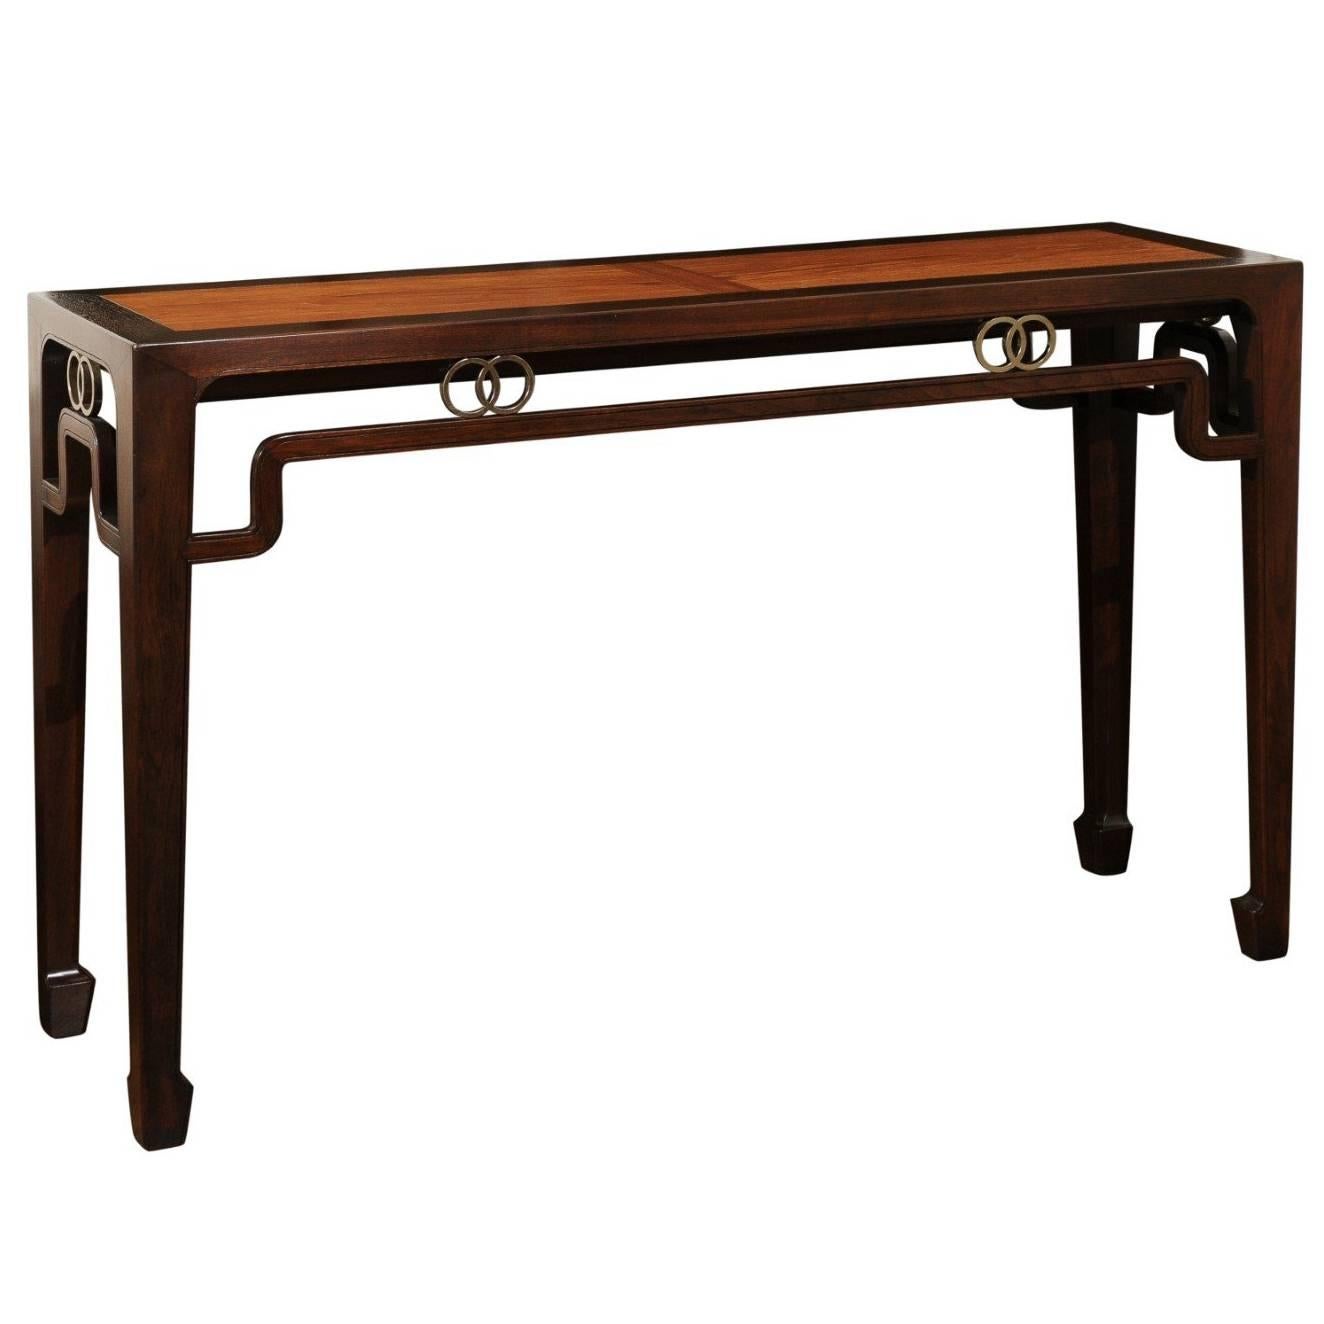 Stunning Restored Altar Console Table by Michael Taylor for Baker, circa 1970